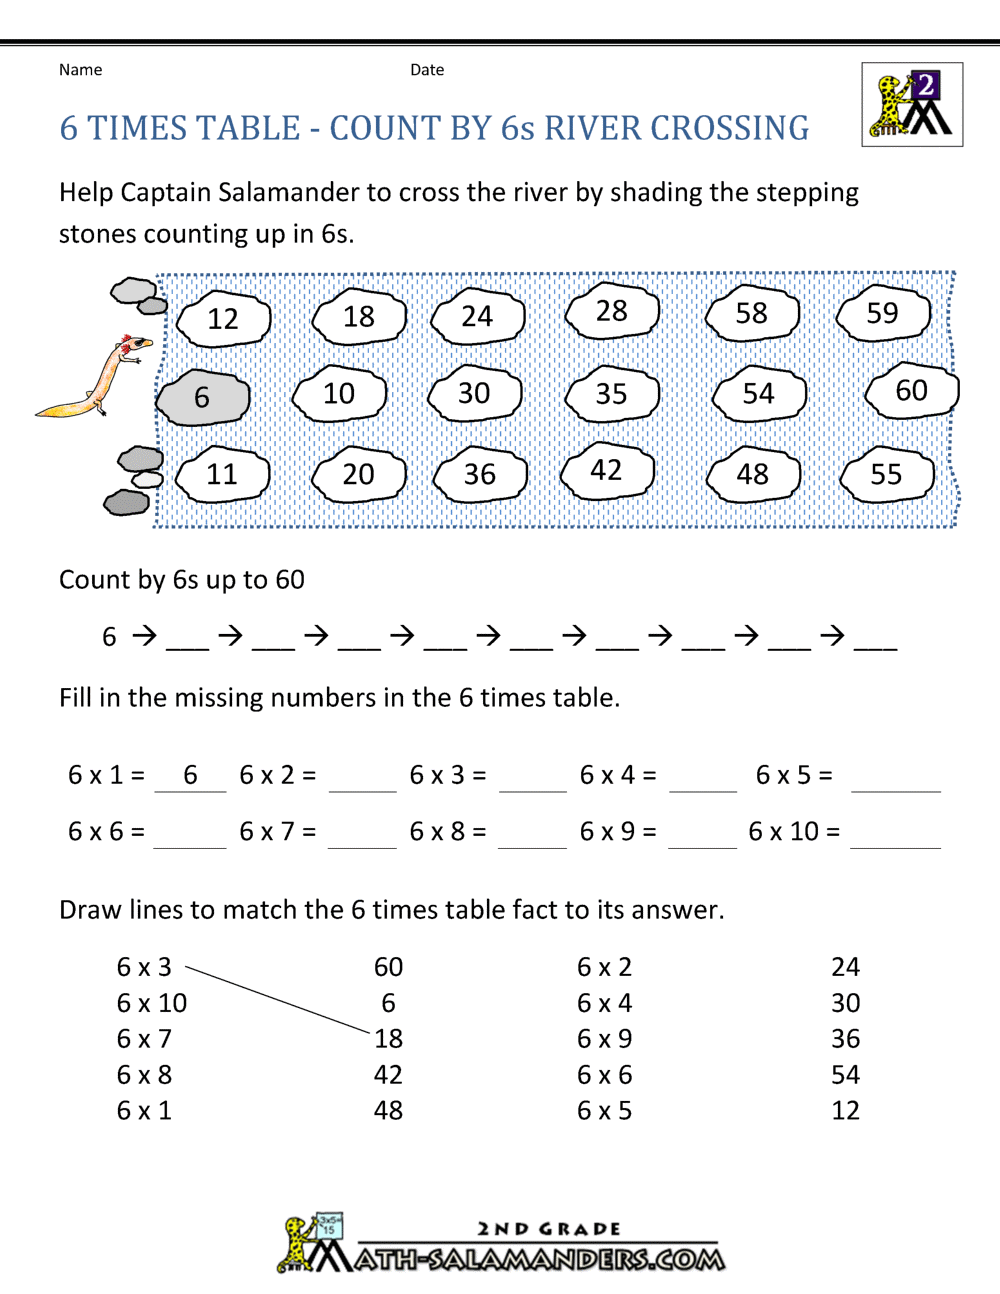 11 Times Table With Regard To 6 Times Table Worksheet